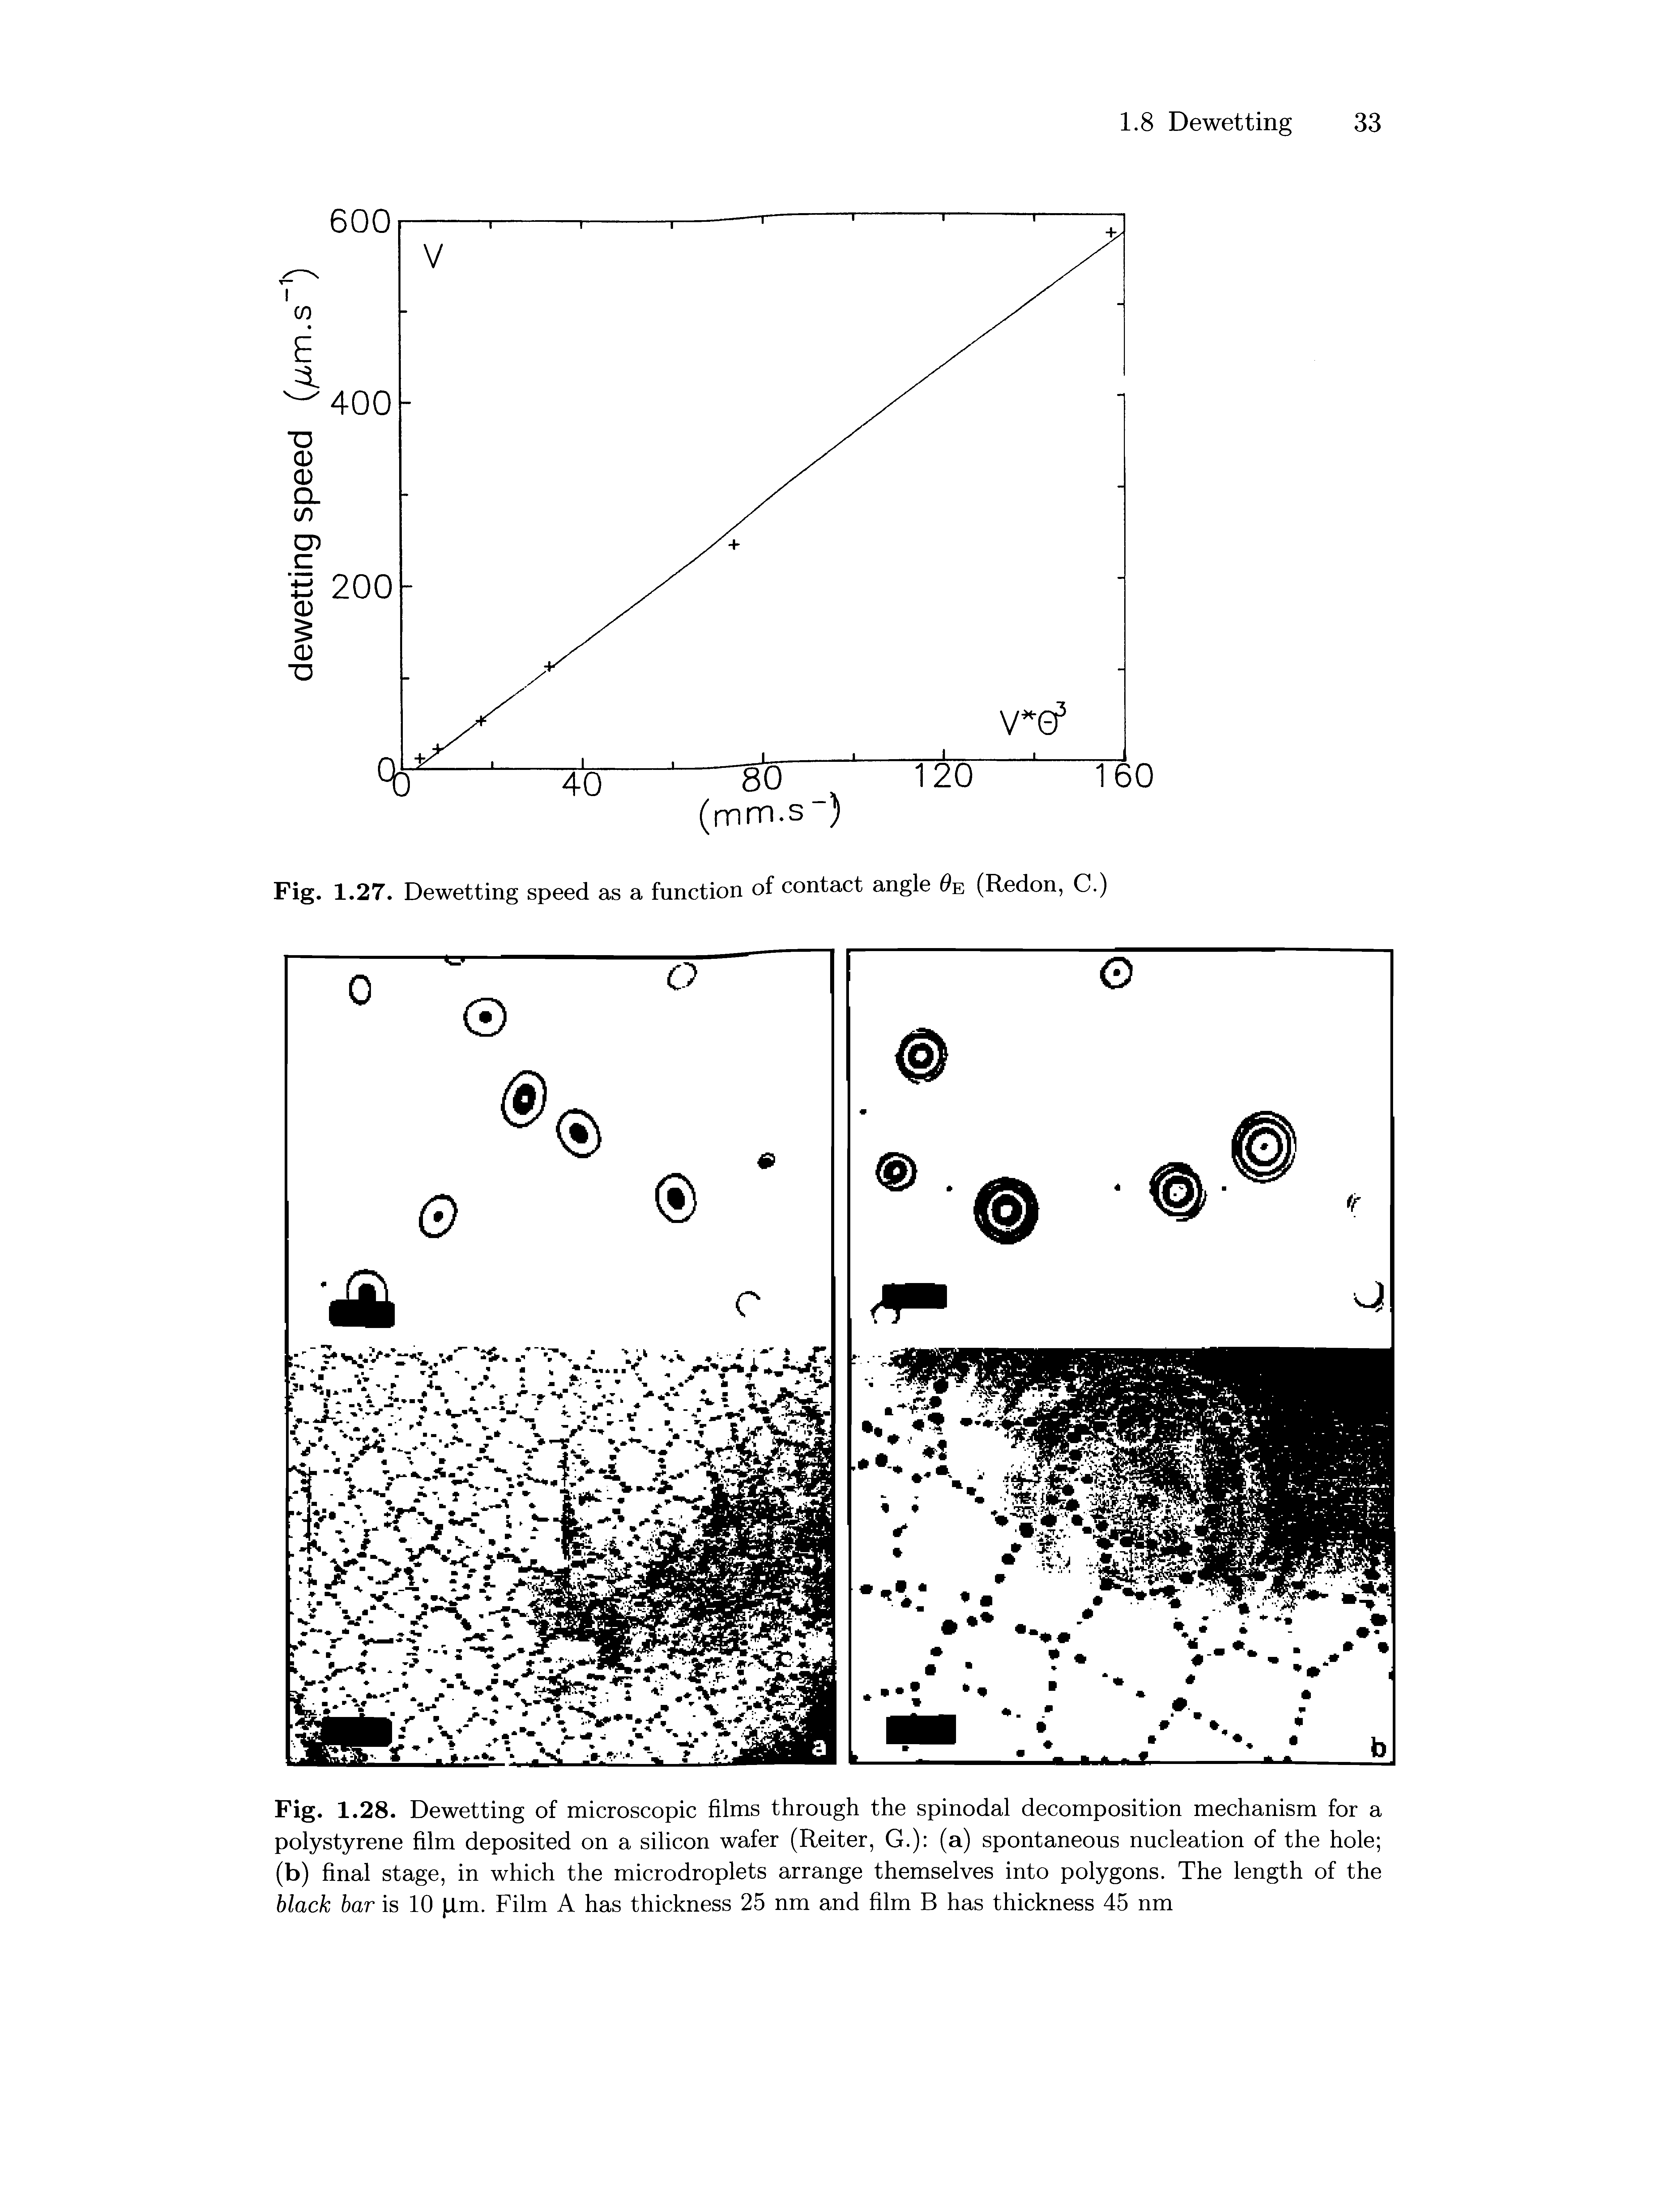 Fig. 1.28. Dewetting of microscopic films through the spinodal decomposition mechanism for a polystyrene film deposited on a silicon wafer (Reiter, G.) (a) spontaneous nucleation of the hole (b) final stage, in which the microdroplets arrange themselves into polygons. The length of the black bar is 10 lm. Film A has thickness 25 nm and film B has thickness 45 nm...